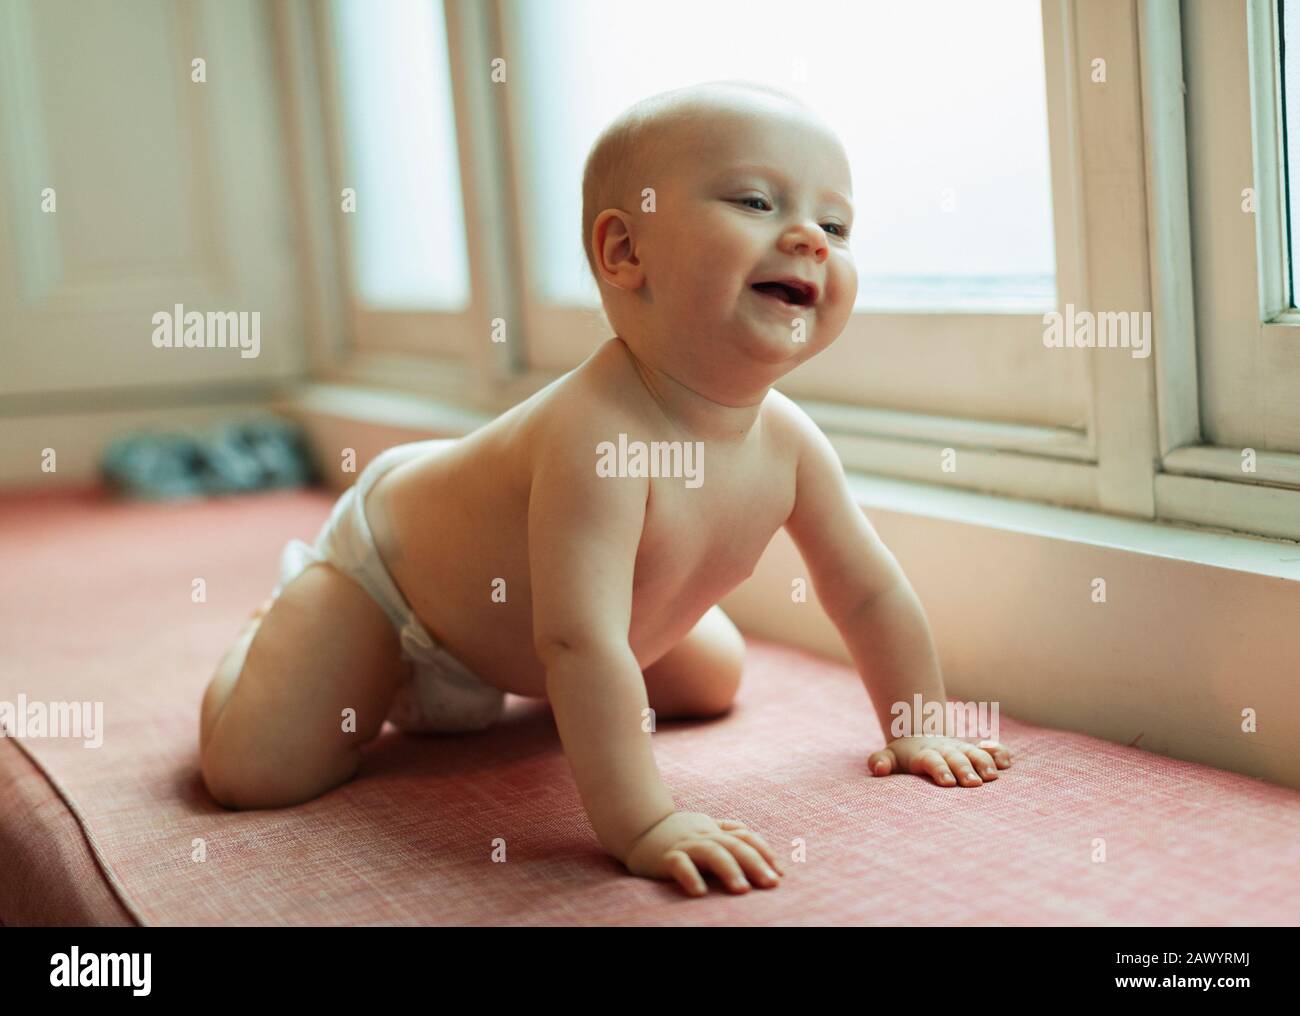 Cute baby girl in diaper laughing on window seat Stock Photo